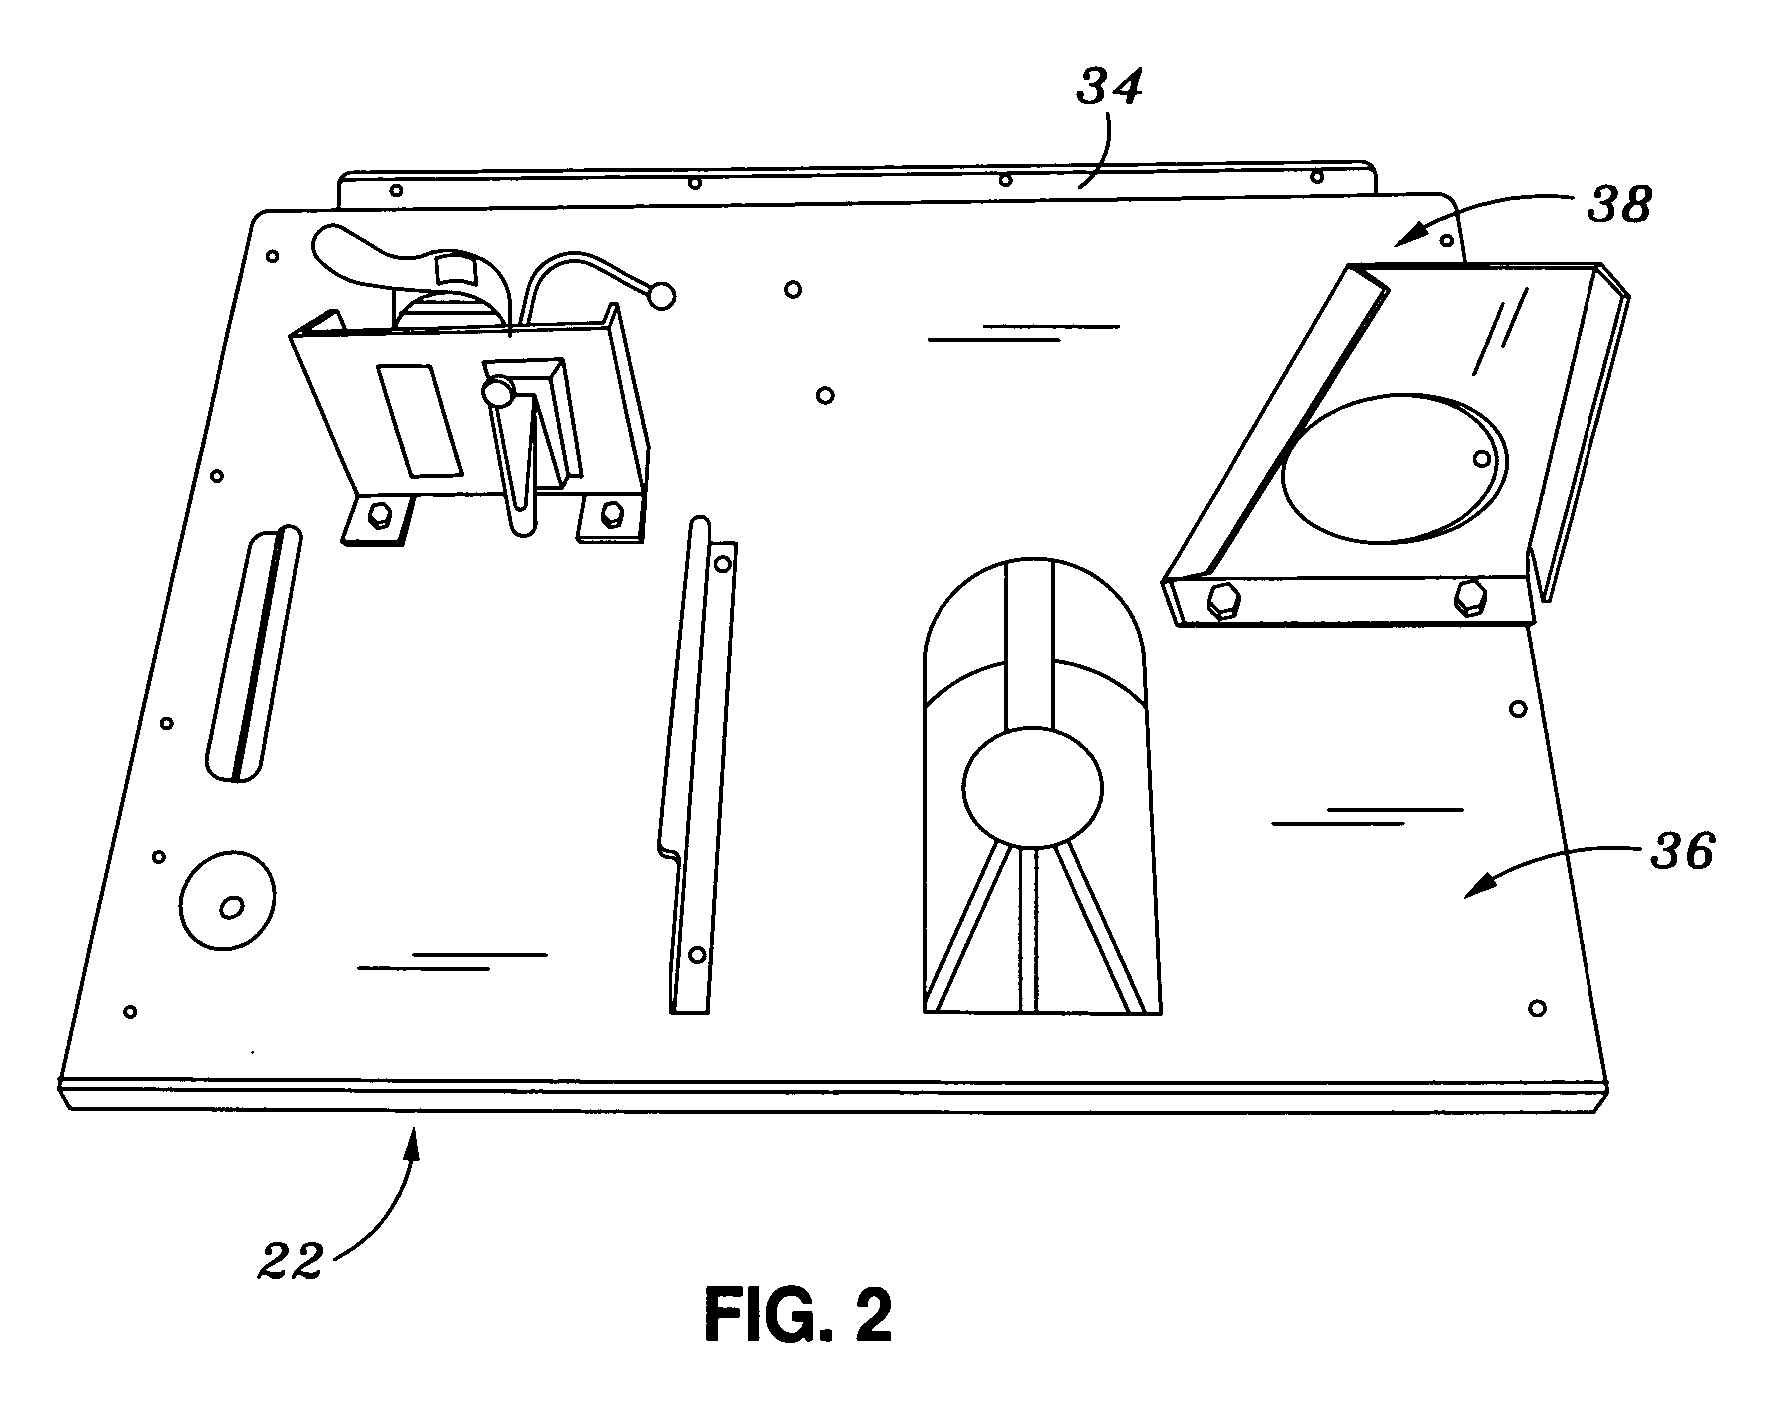 Method and system for localized authentication of gaming machine